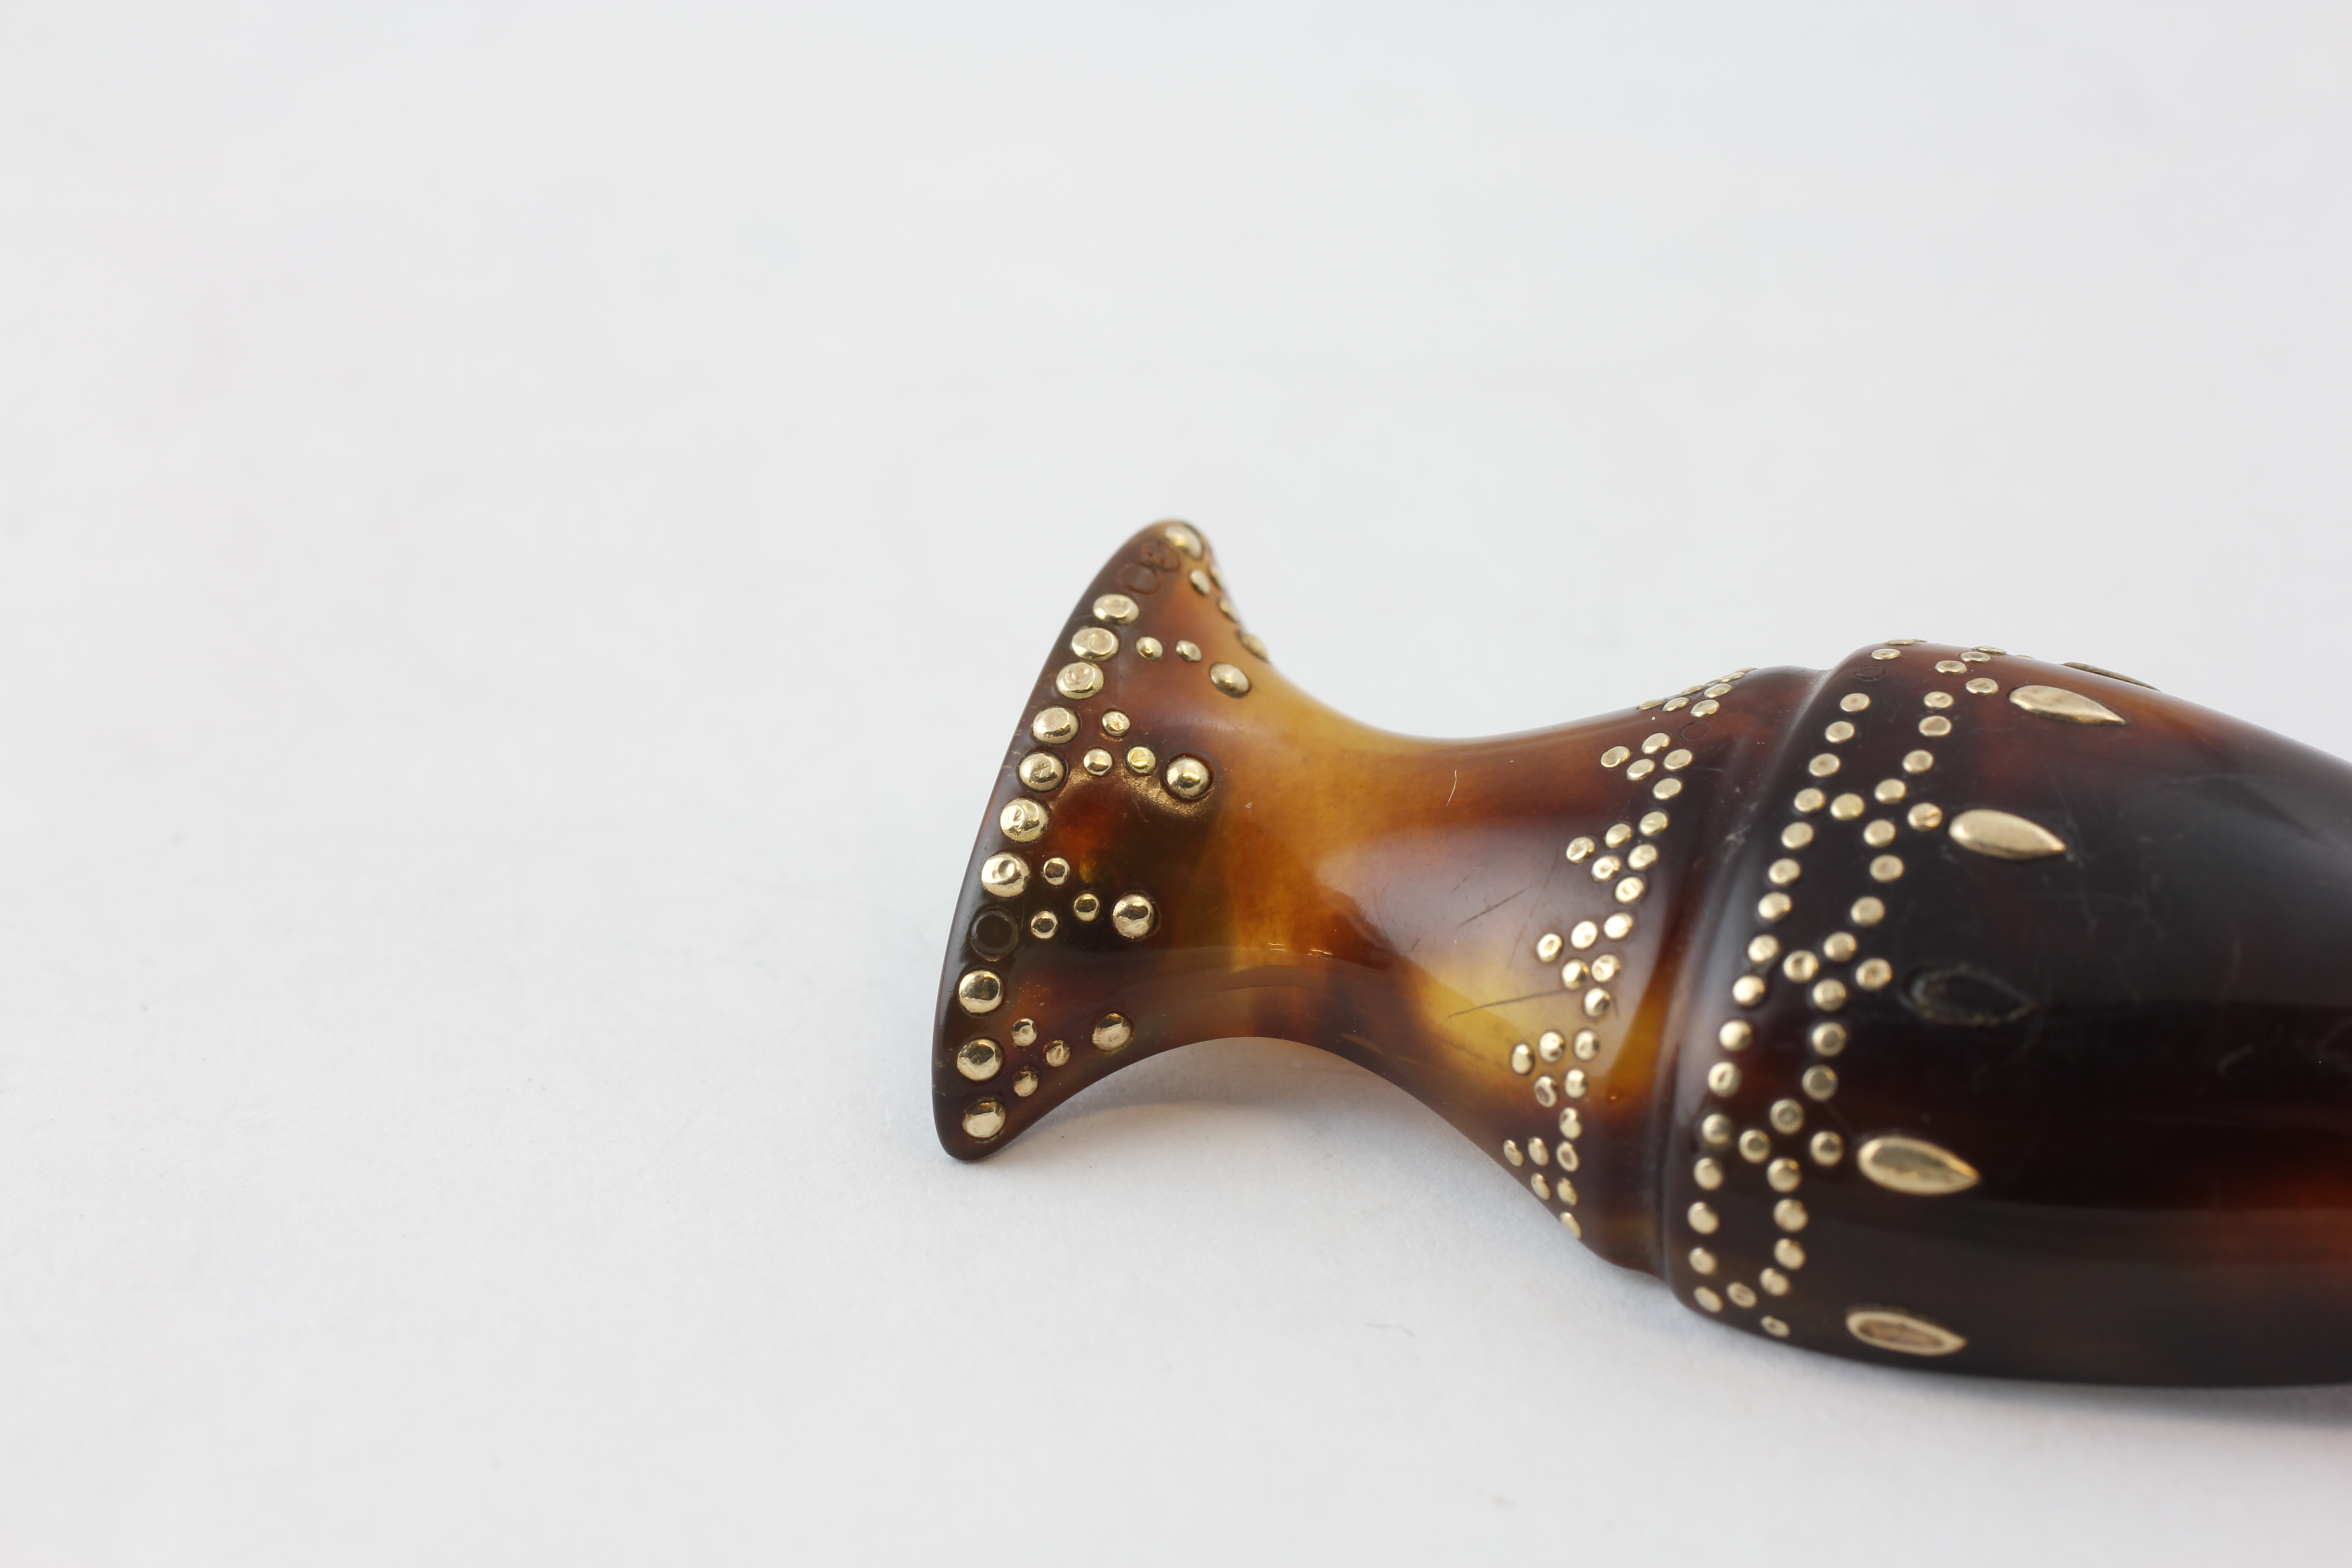 A TORTOISESHELL BROOCH INLAID WITH GOLD BEADING (SOME LOSSES) BROOCH LENGTH 59MM - Image 4 of 5